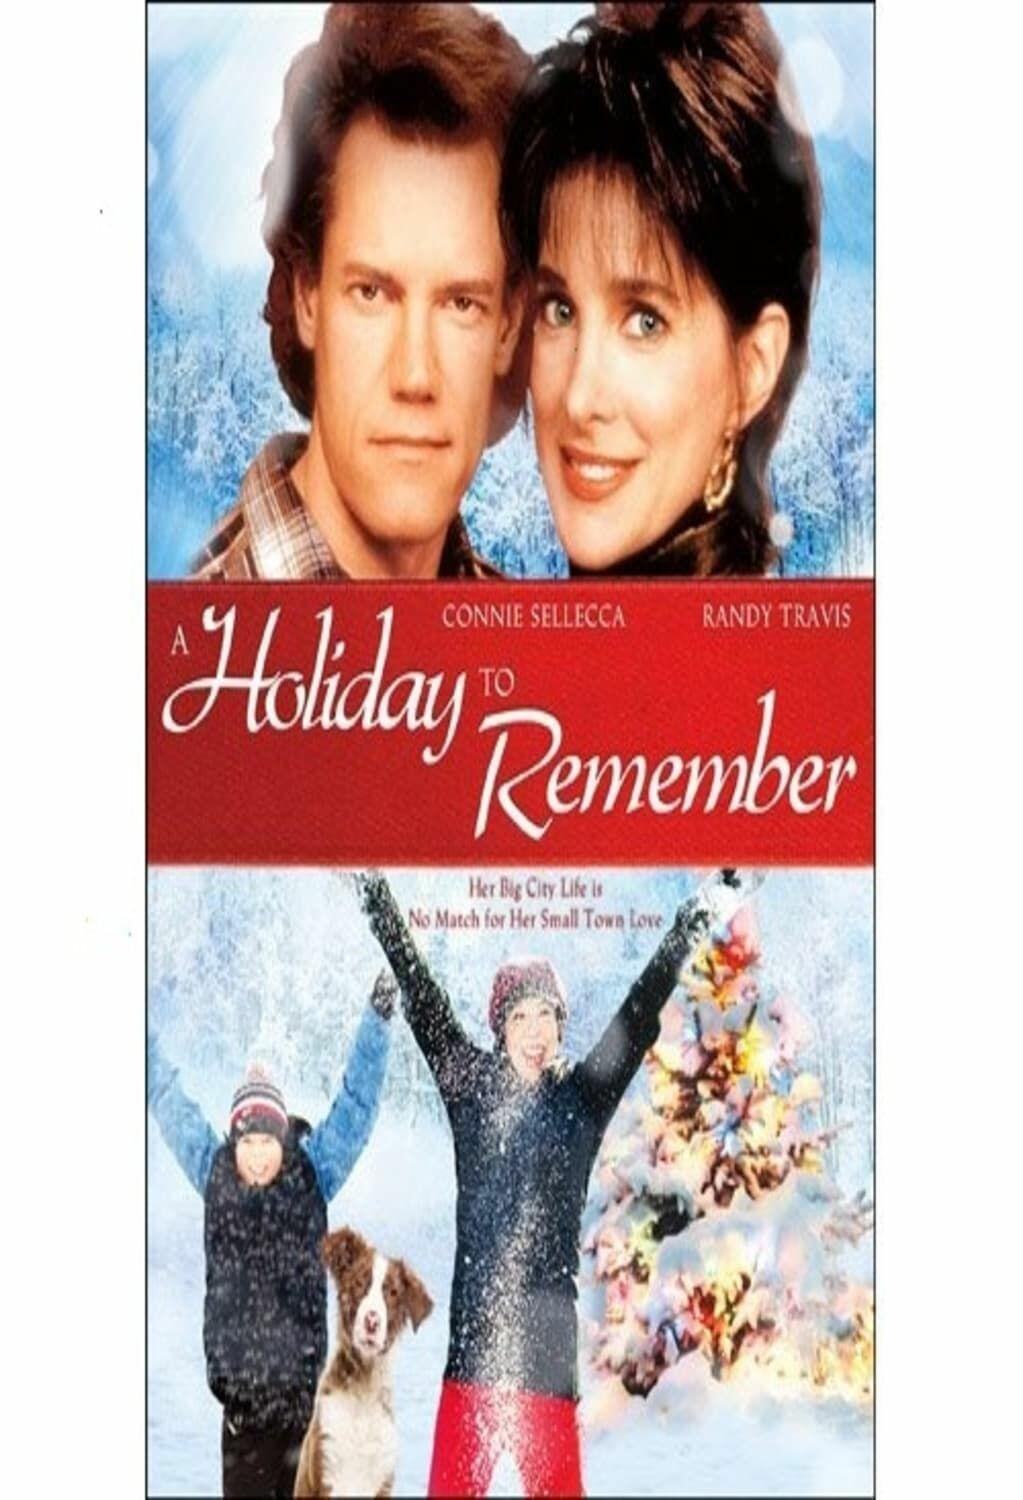 Holiday to Remember (DVD) on MovieShack